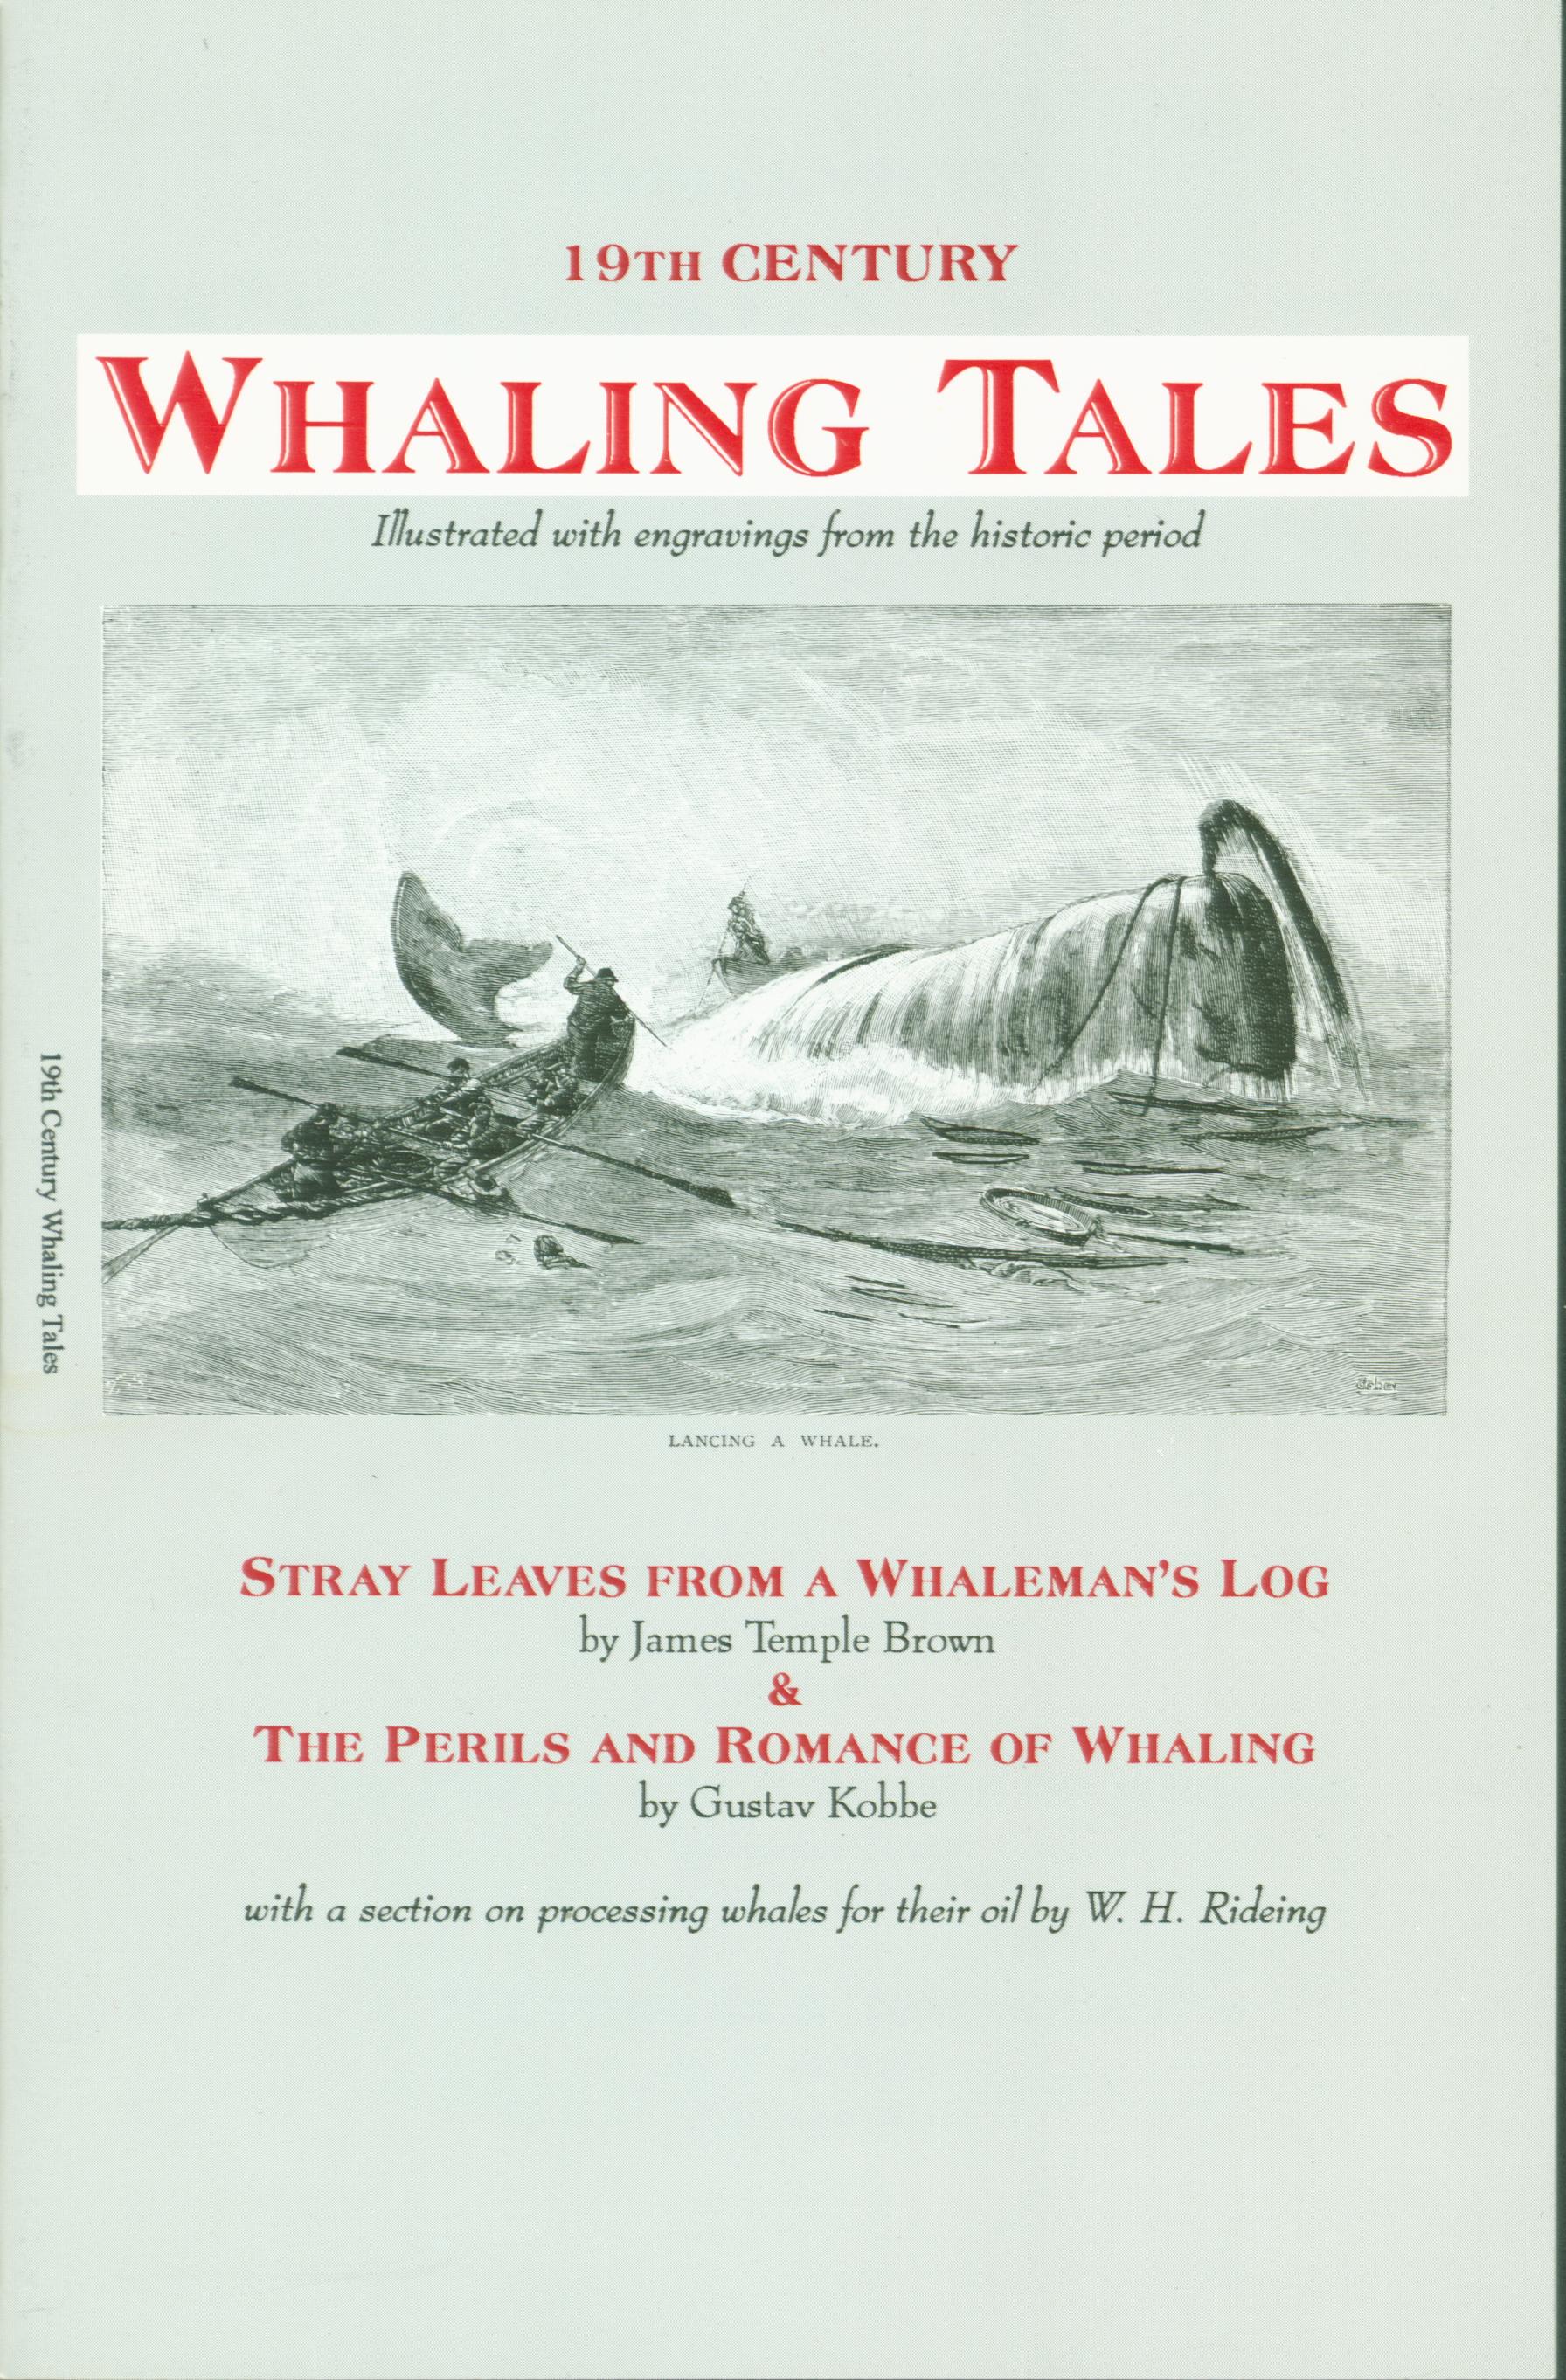 19th CENTURY WHALING TALES.